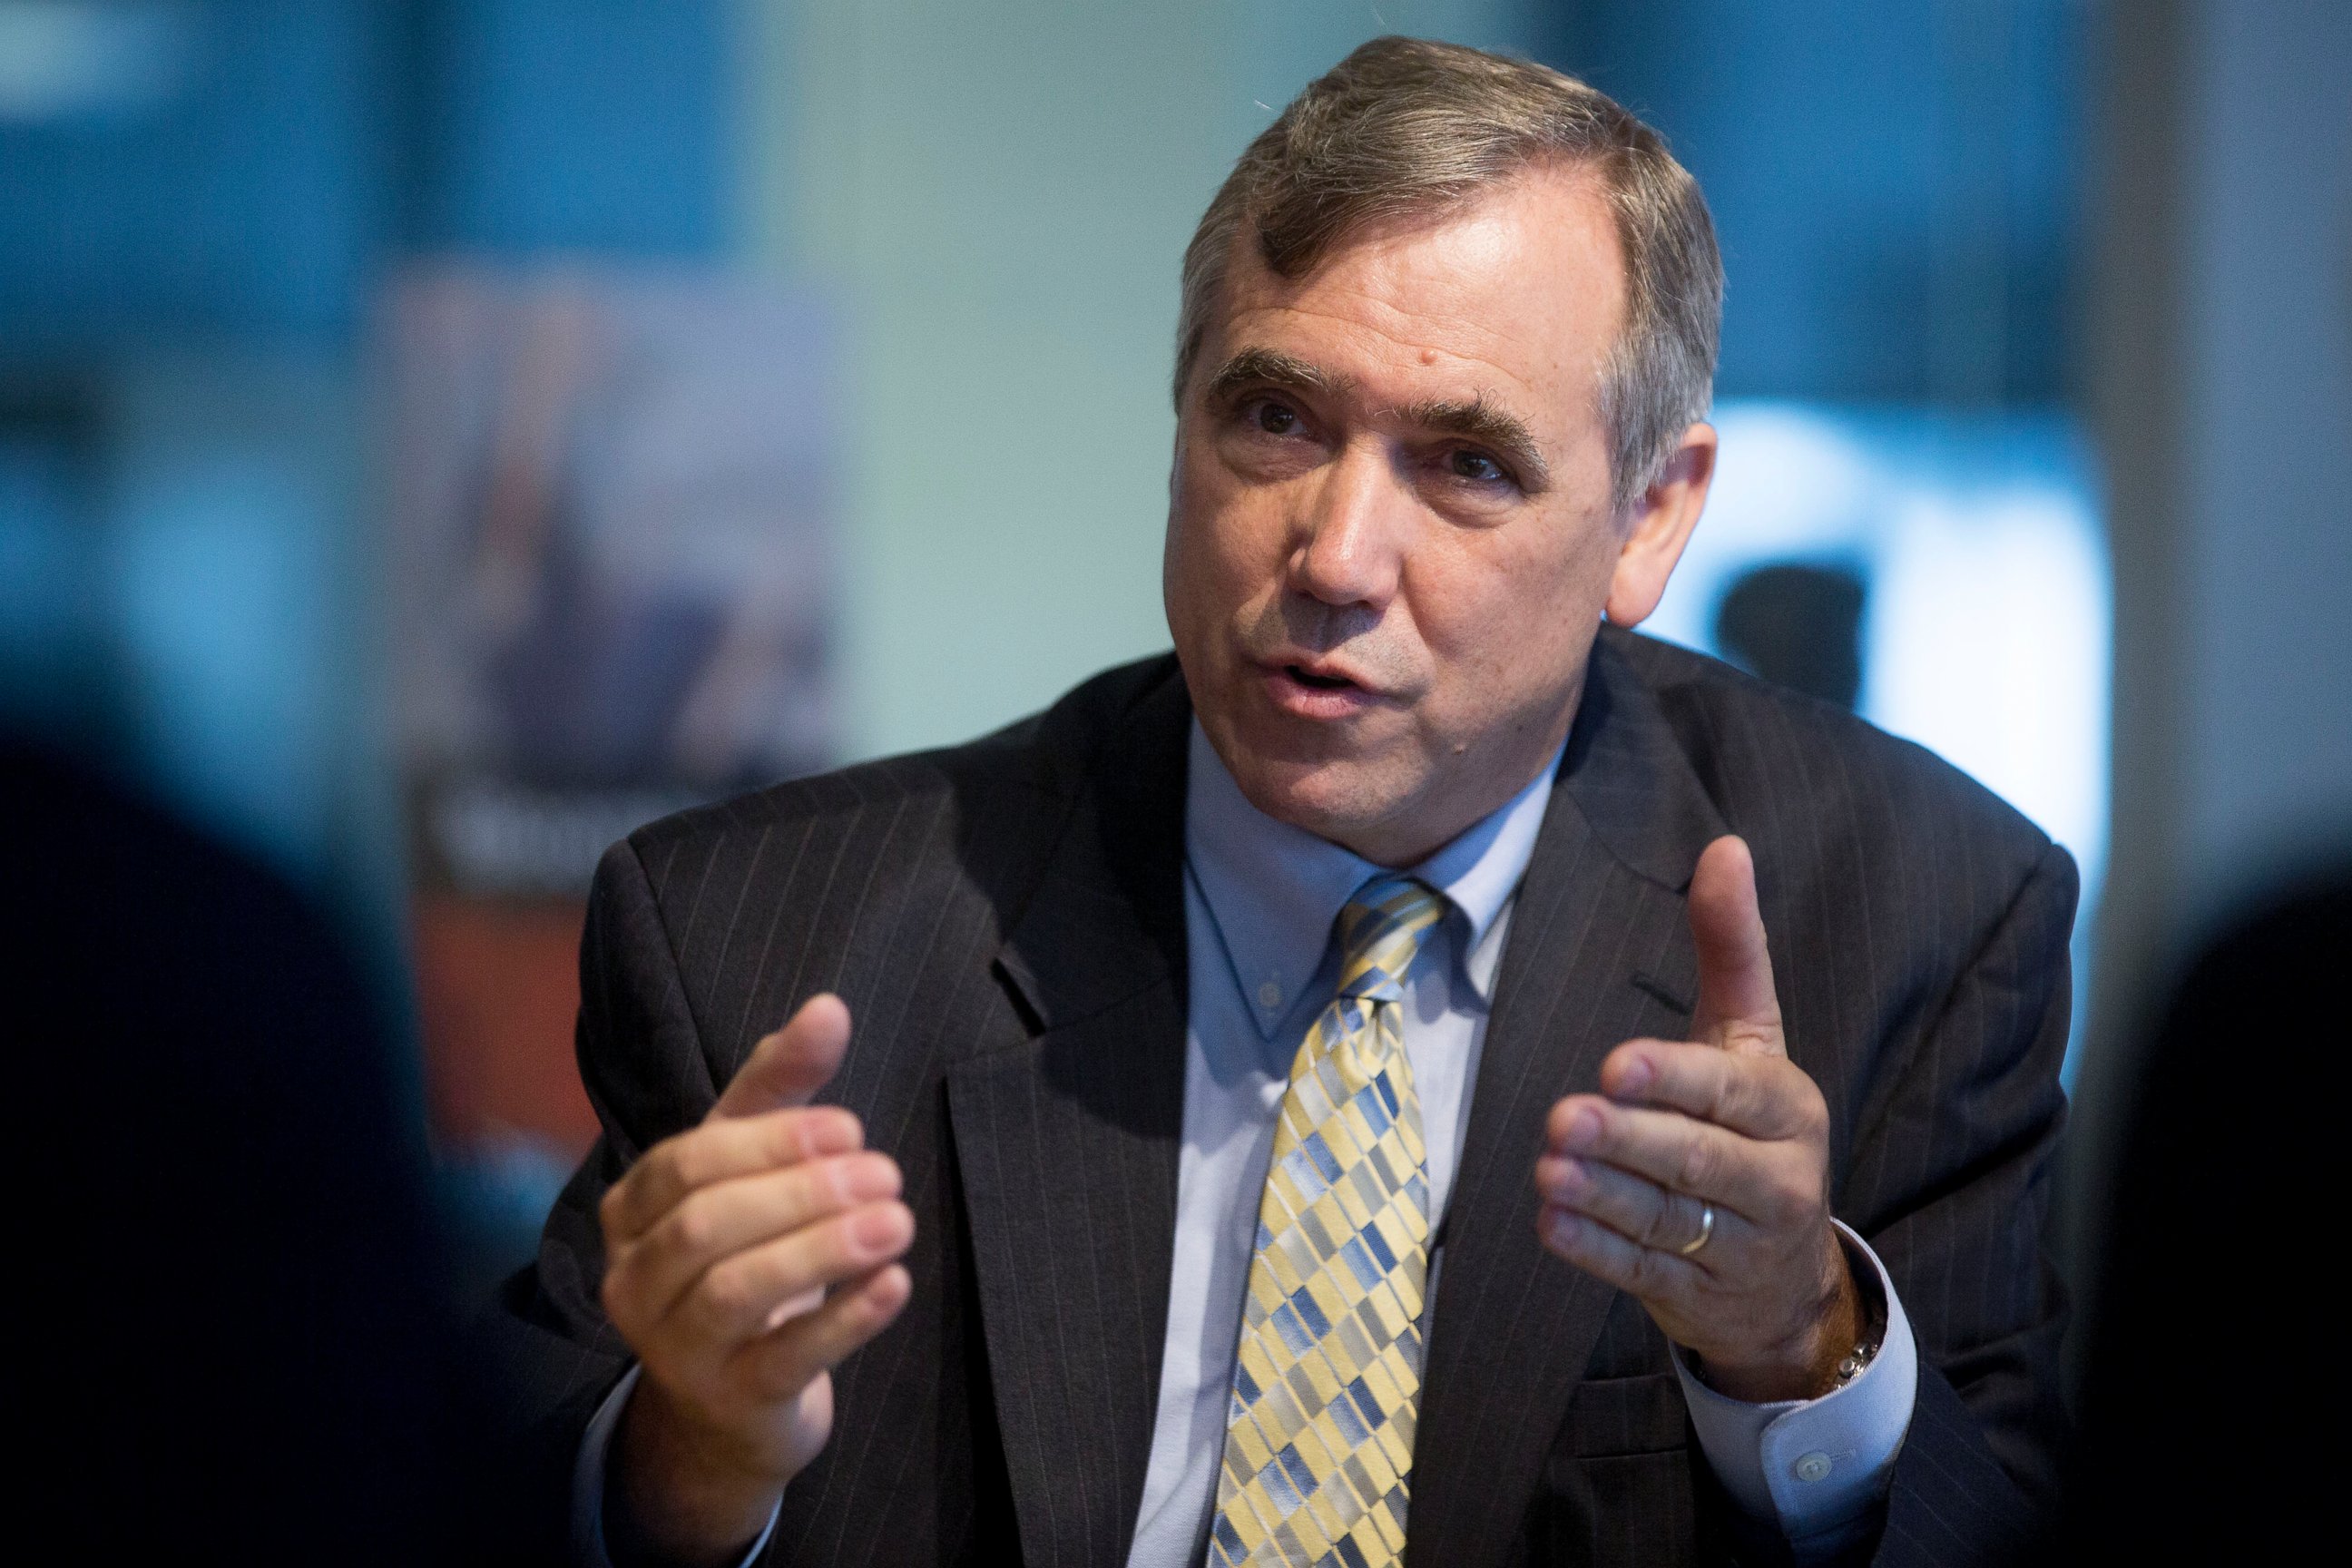 PHOTO: Senator Jeff Merkley, a Democrat from Oregon, speaks during an interview in Washington in this July 27, 2015 file photo.